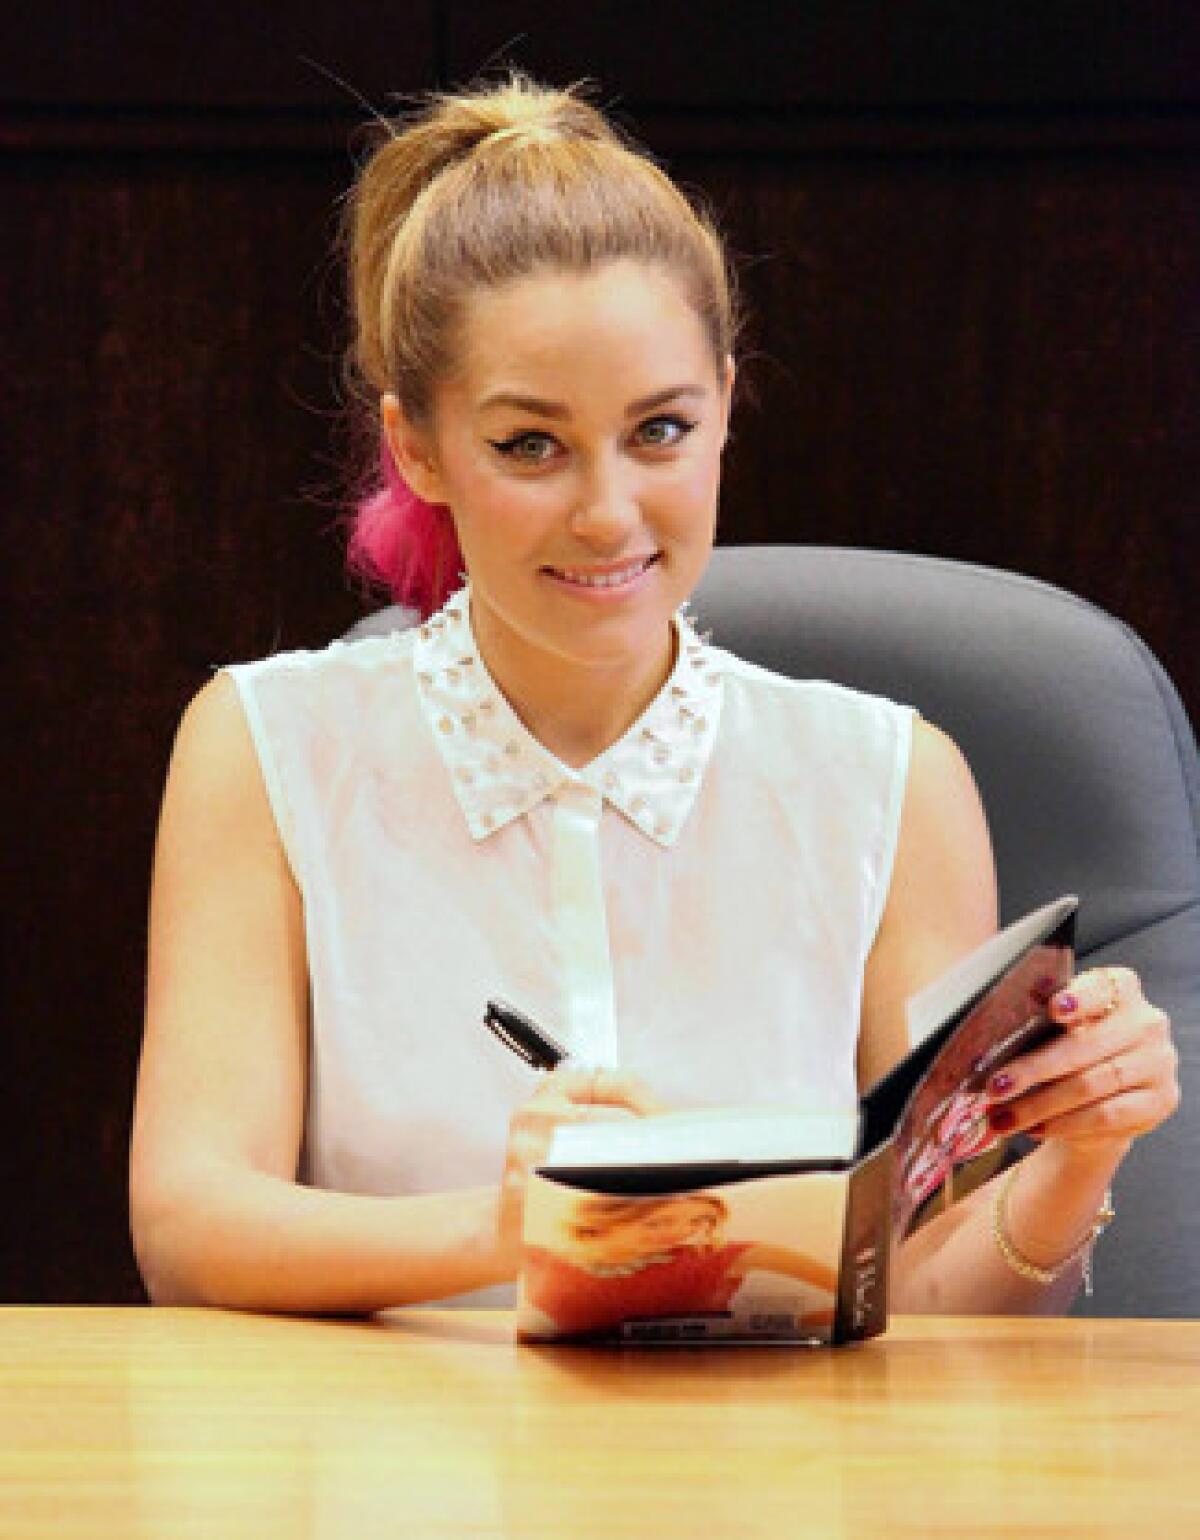 Lauren Conrad building on lifestyle brands with 'Beauty' book